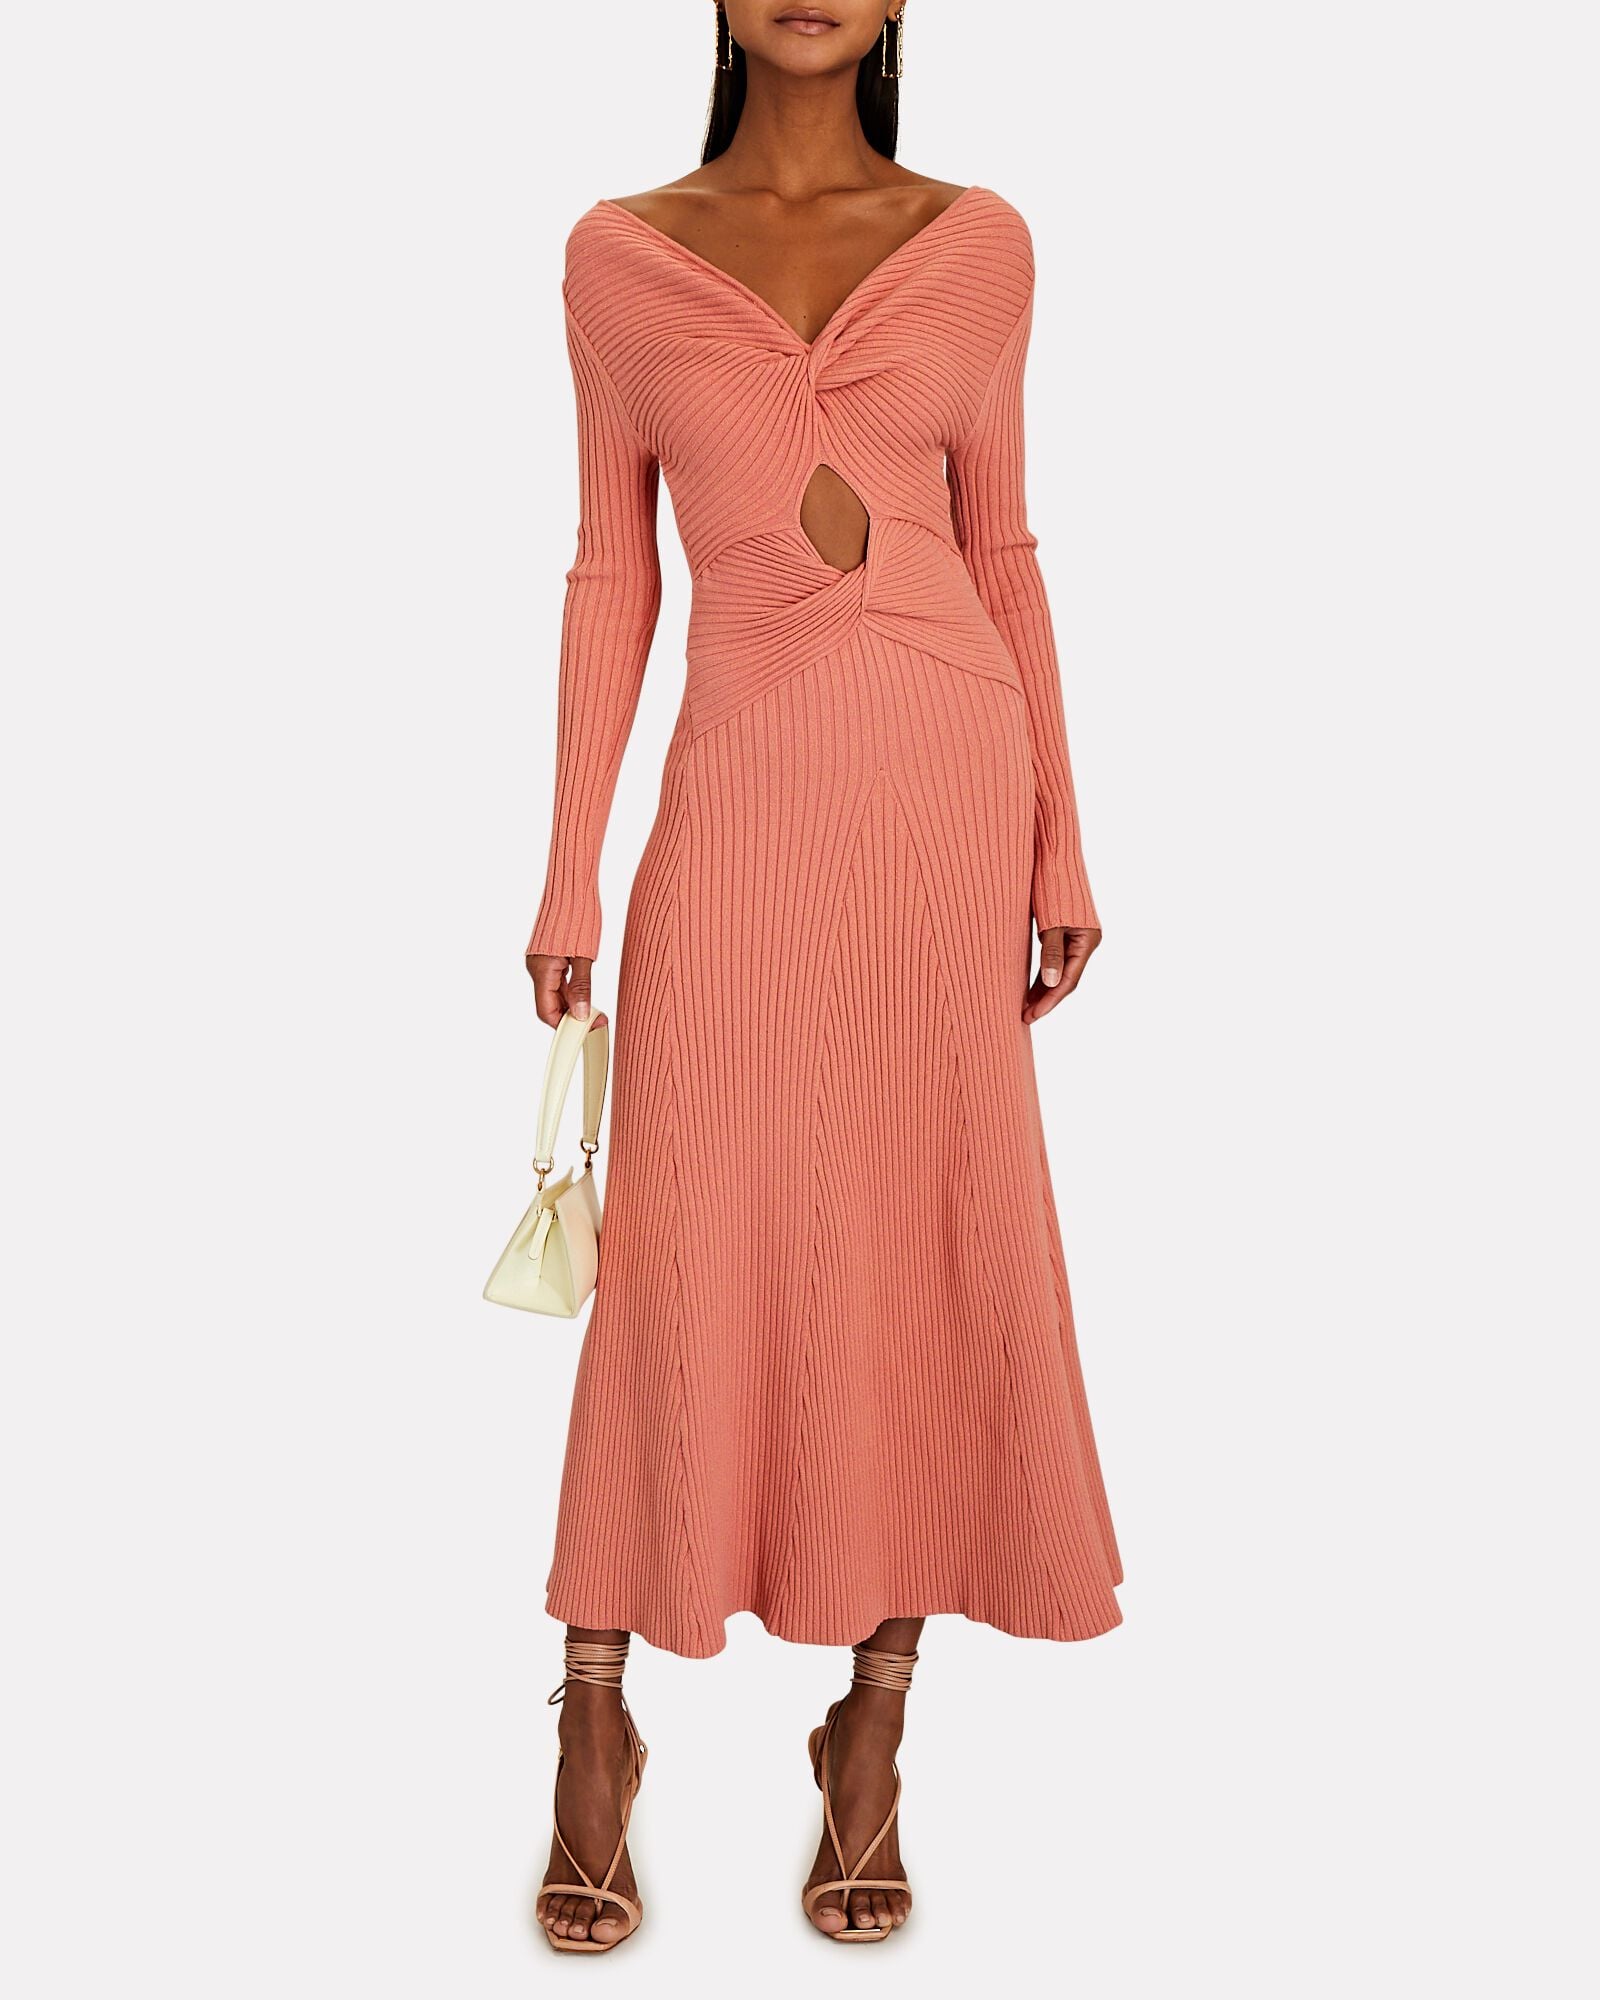 The Best Knit Dresses For the Holidays and Beyond